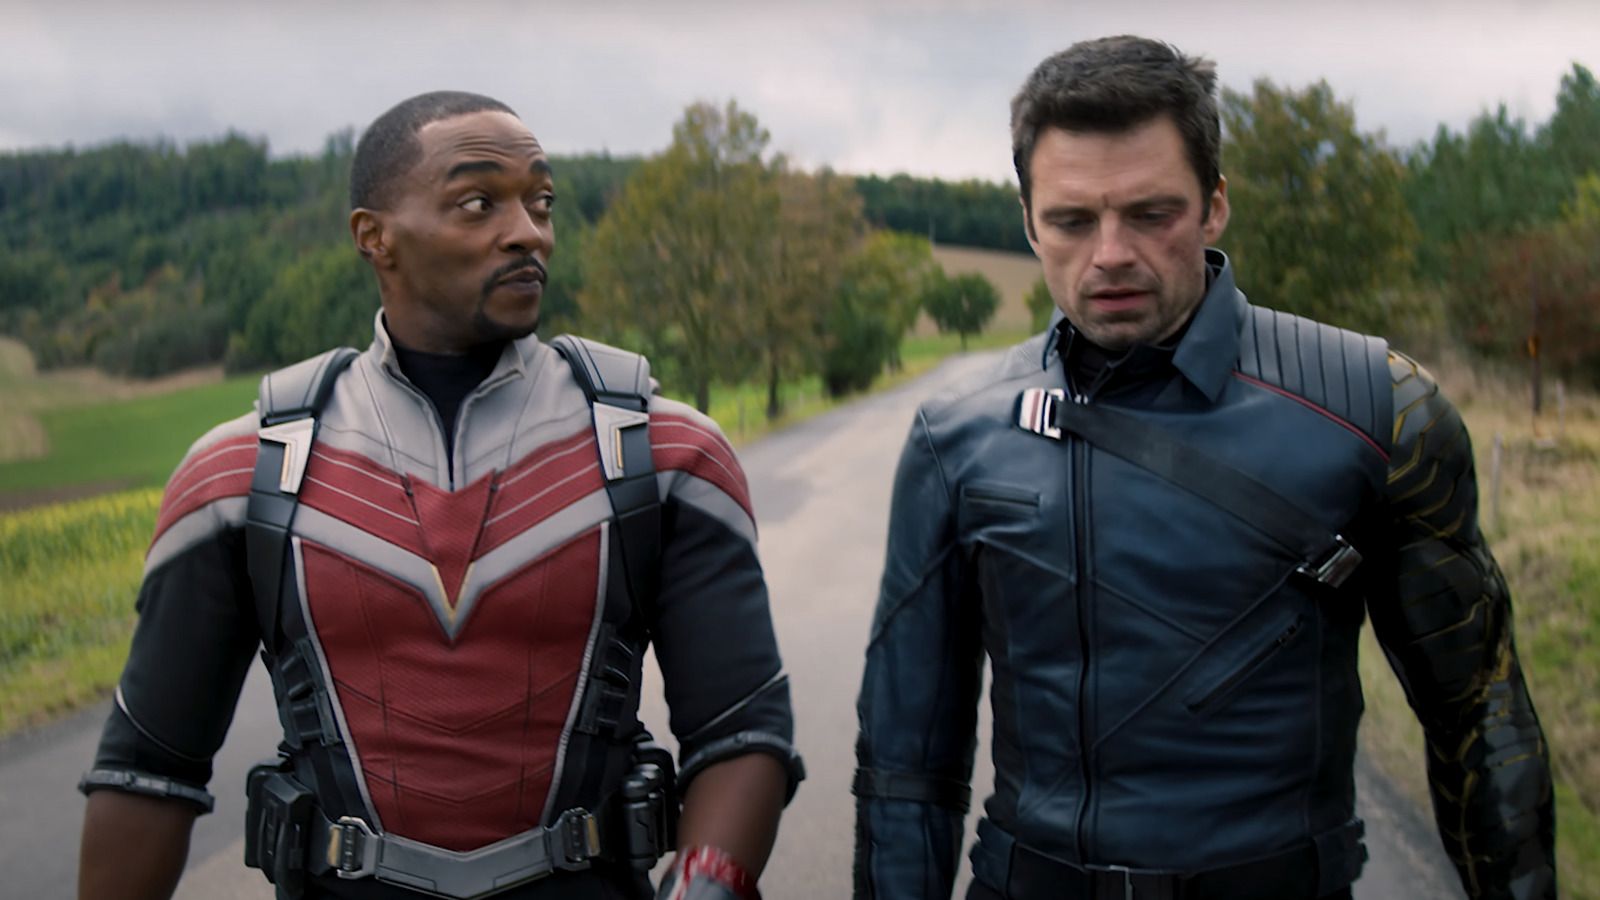 Small Details You Missed In The Falcon And The Winter Soldier Trailer